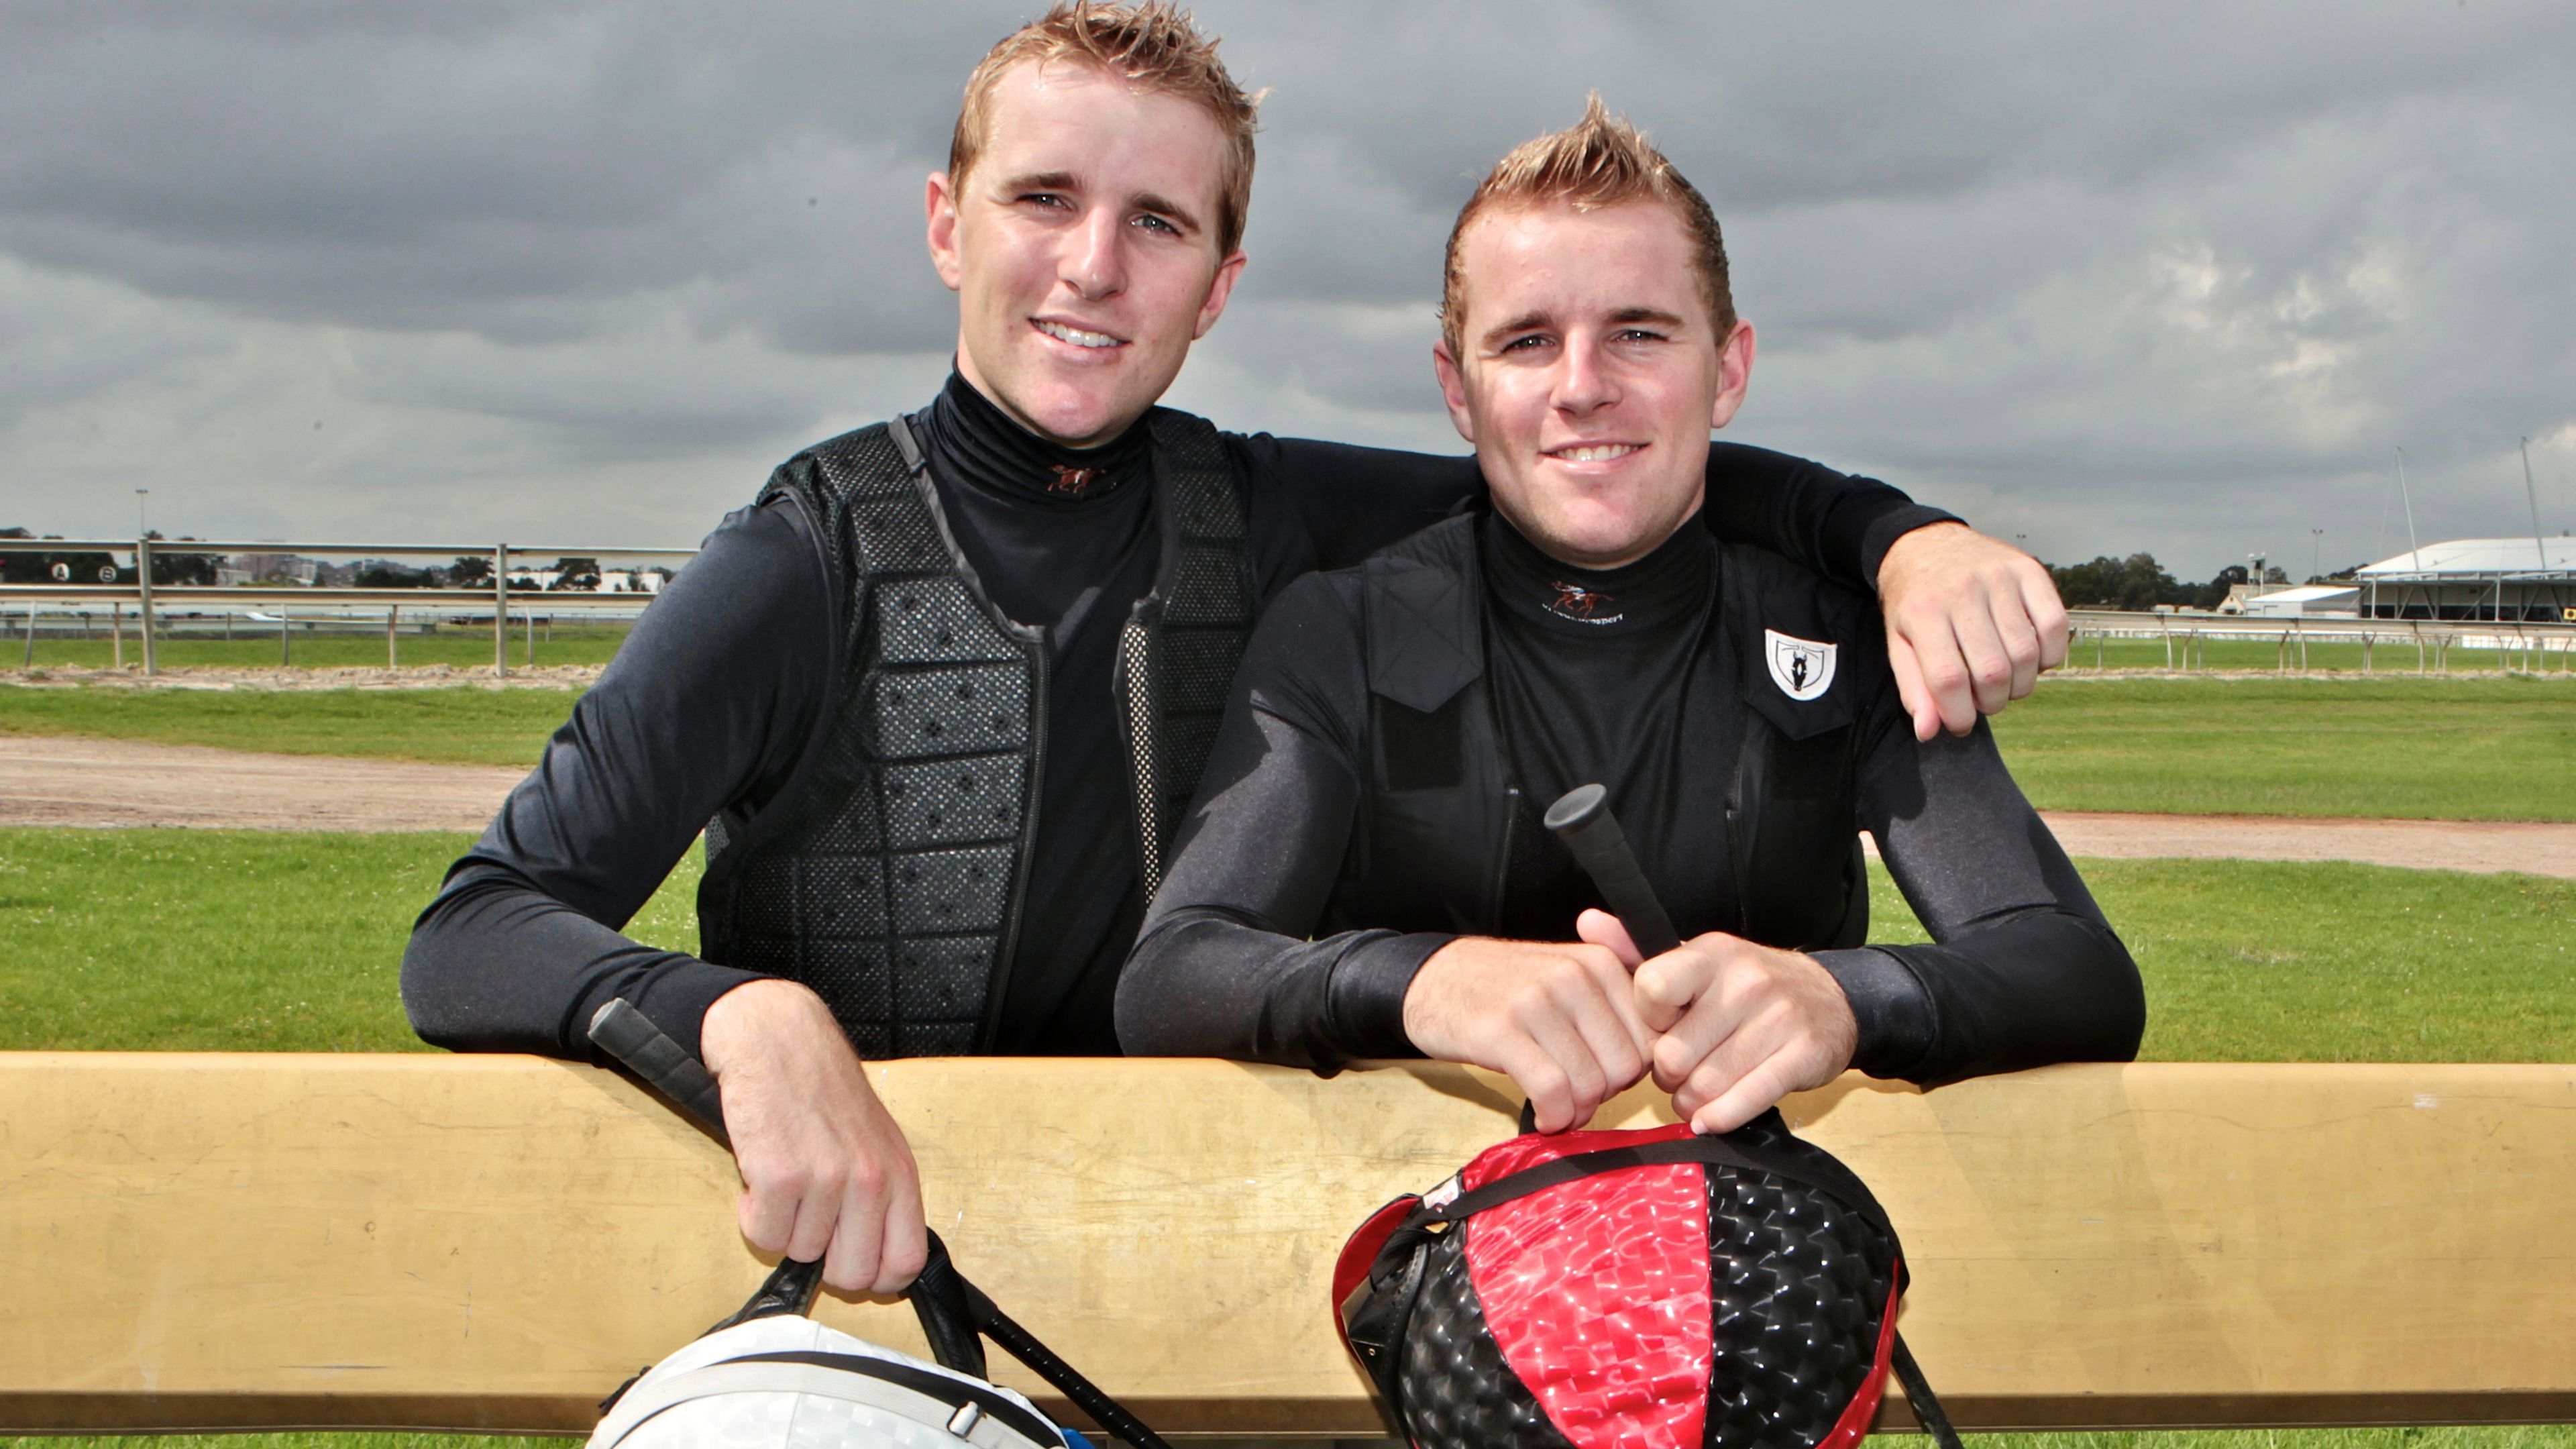 EXCLUSIVE: Top jockey Tommy Berry felt 'dead inside' as twin's death led to spiral